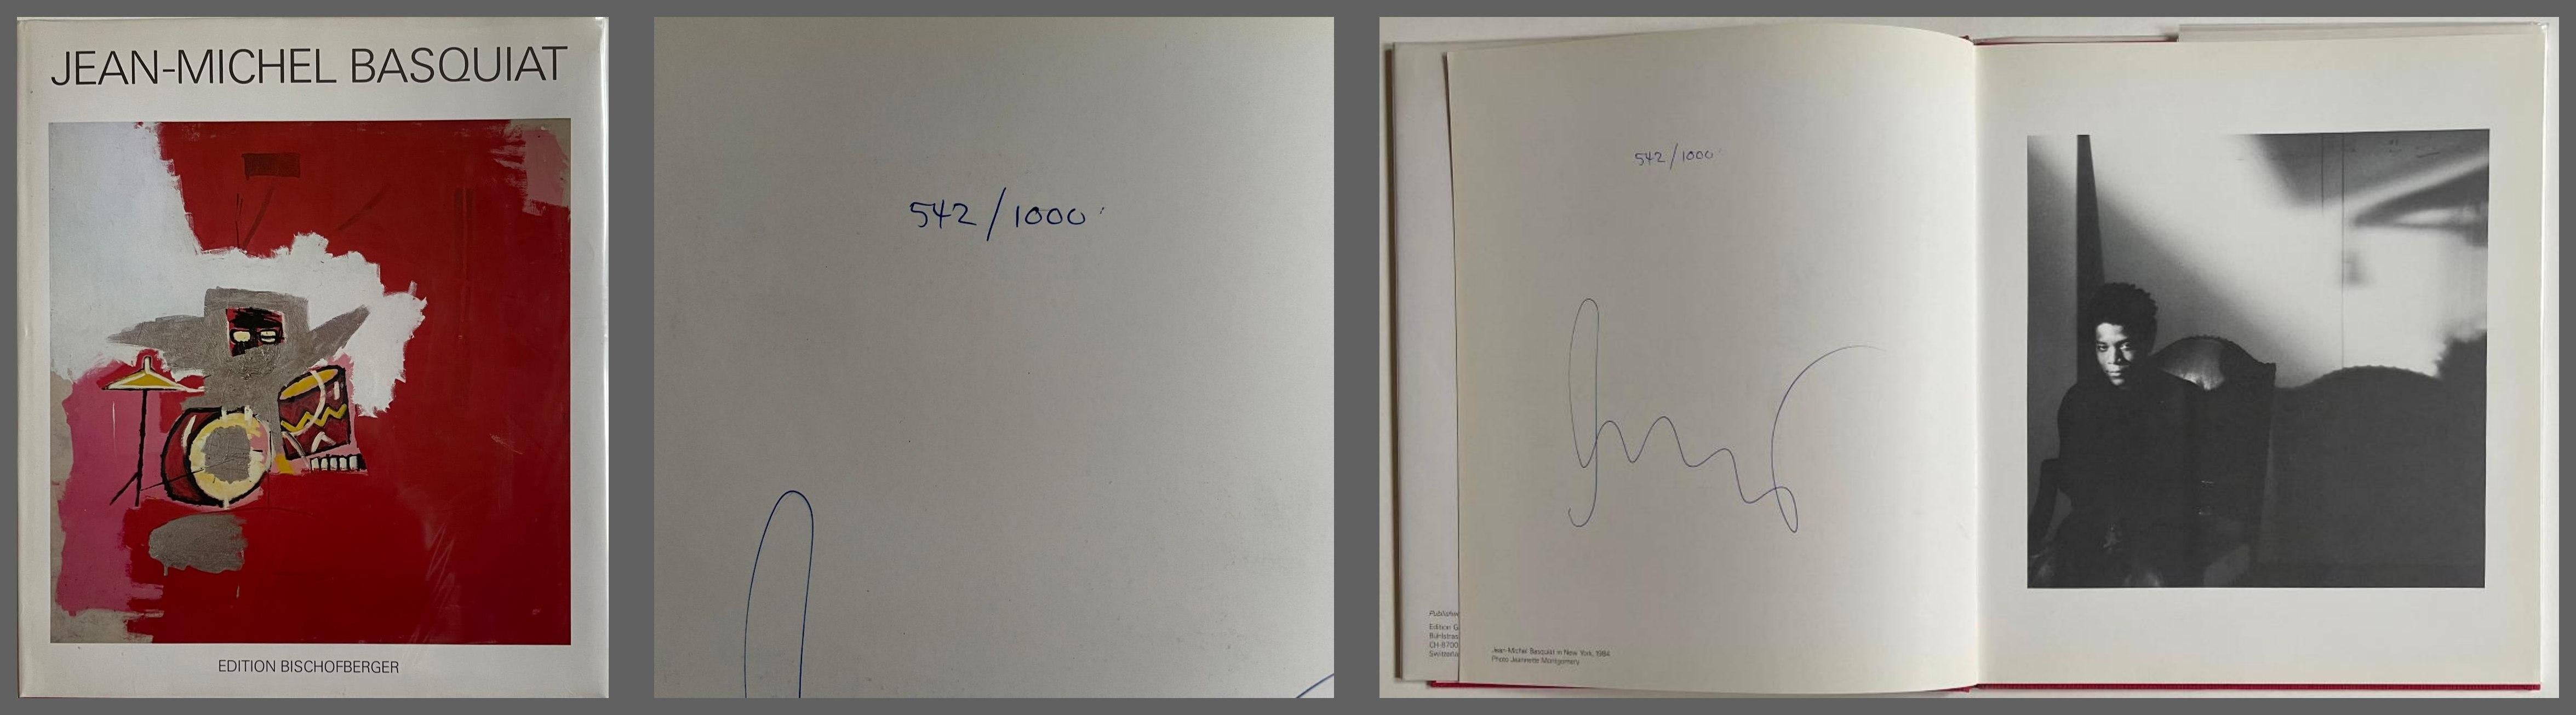 Jean-Michel Basquiat, (monograph, Hand signed and numbered by Basquiat) For Sale 1